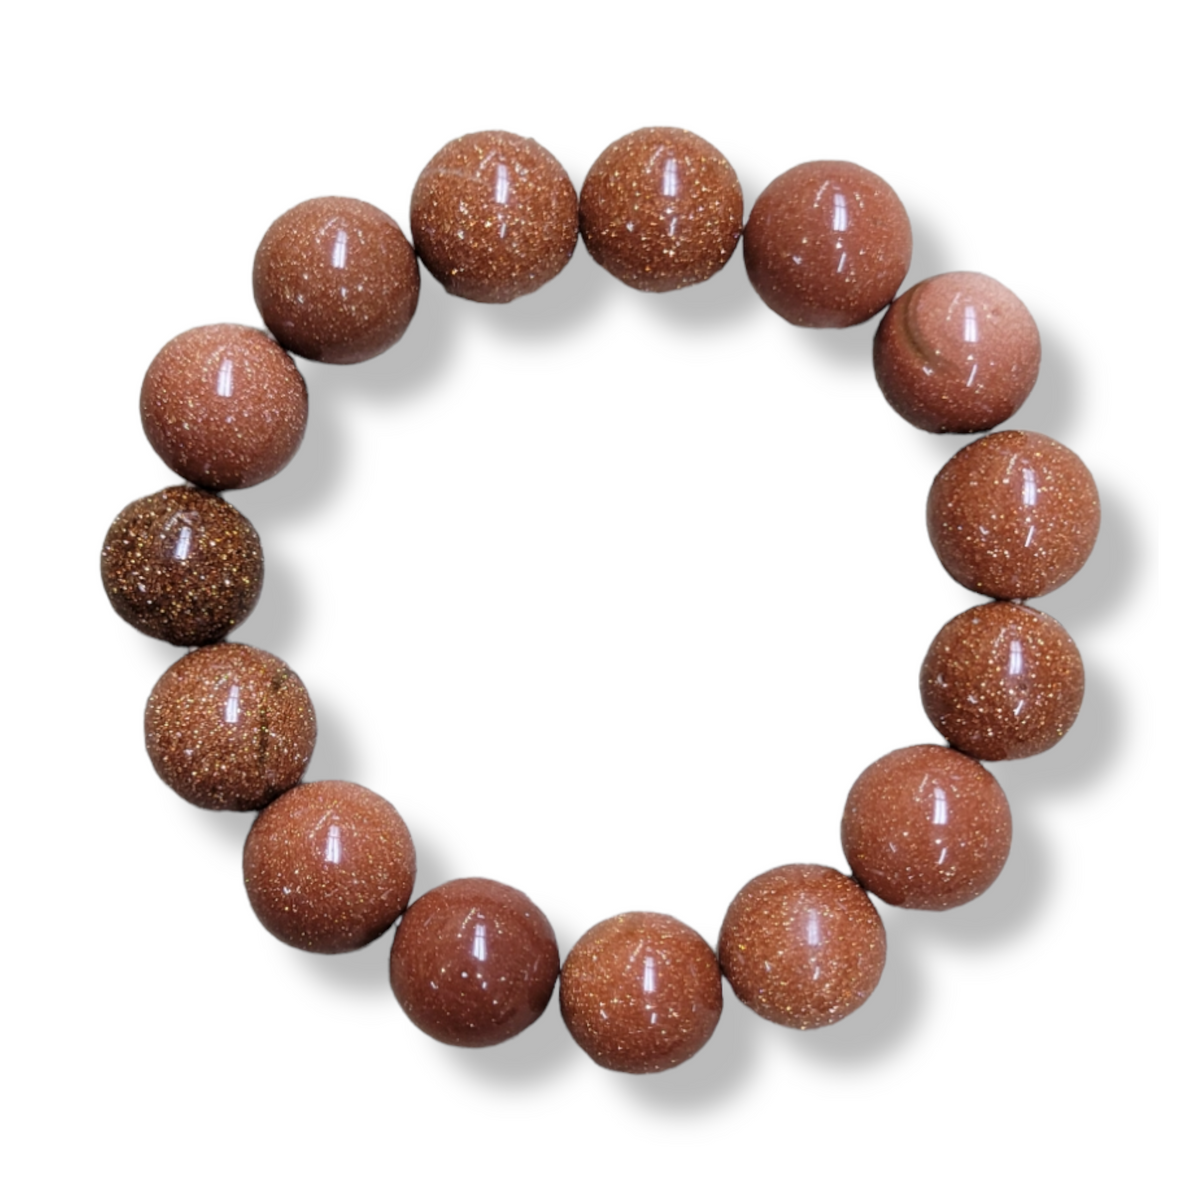 Pop Color Natural Stone 14mm Stretch Beads